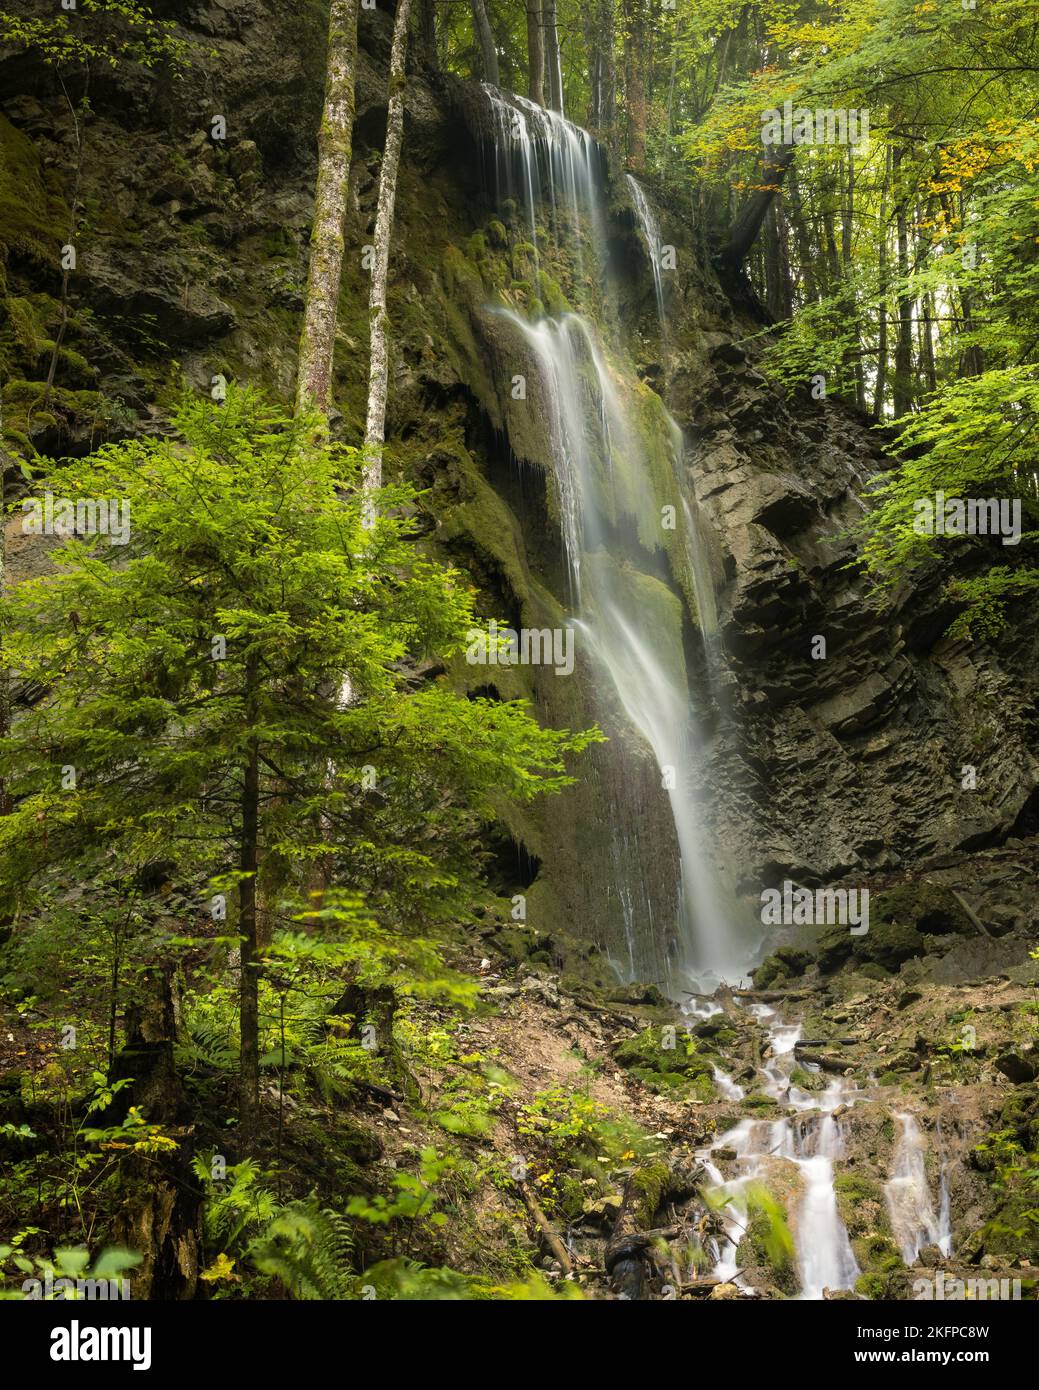 https://c8.alamy.com/comp/2KFPC8W/a-panoramic-view-of-a-waterfall-at-the-entrance-of-the-gorges-de-la-jogne-in-switzerland-2KFPC8W.jpg